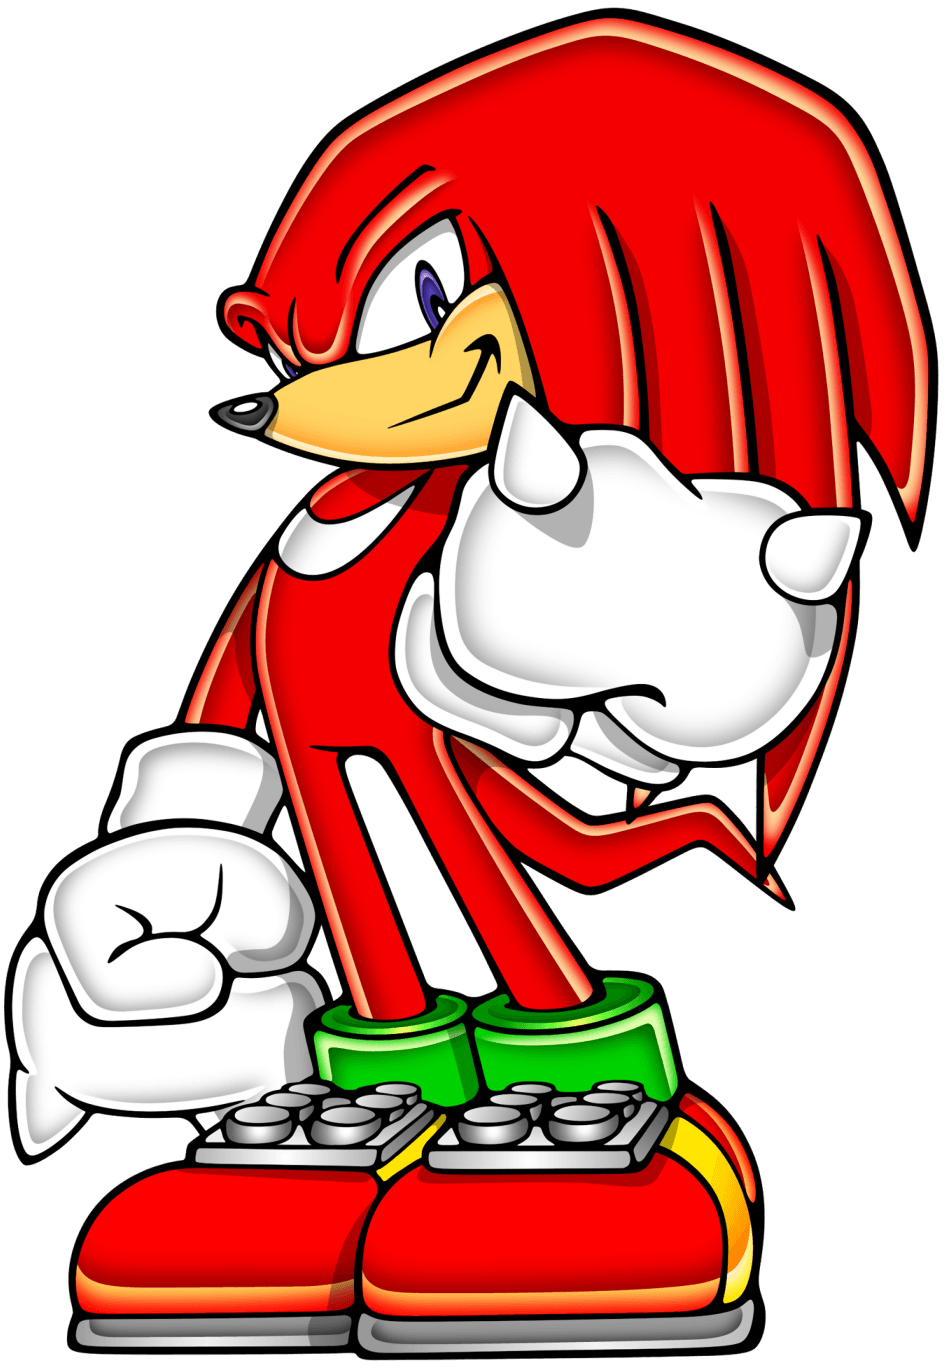 knuckles. Gallery Official Art Knuckles the Echidna Sonic